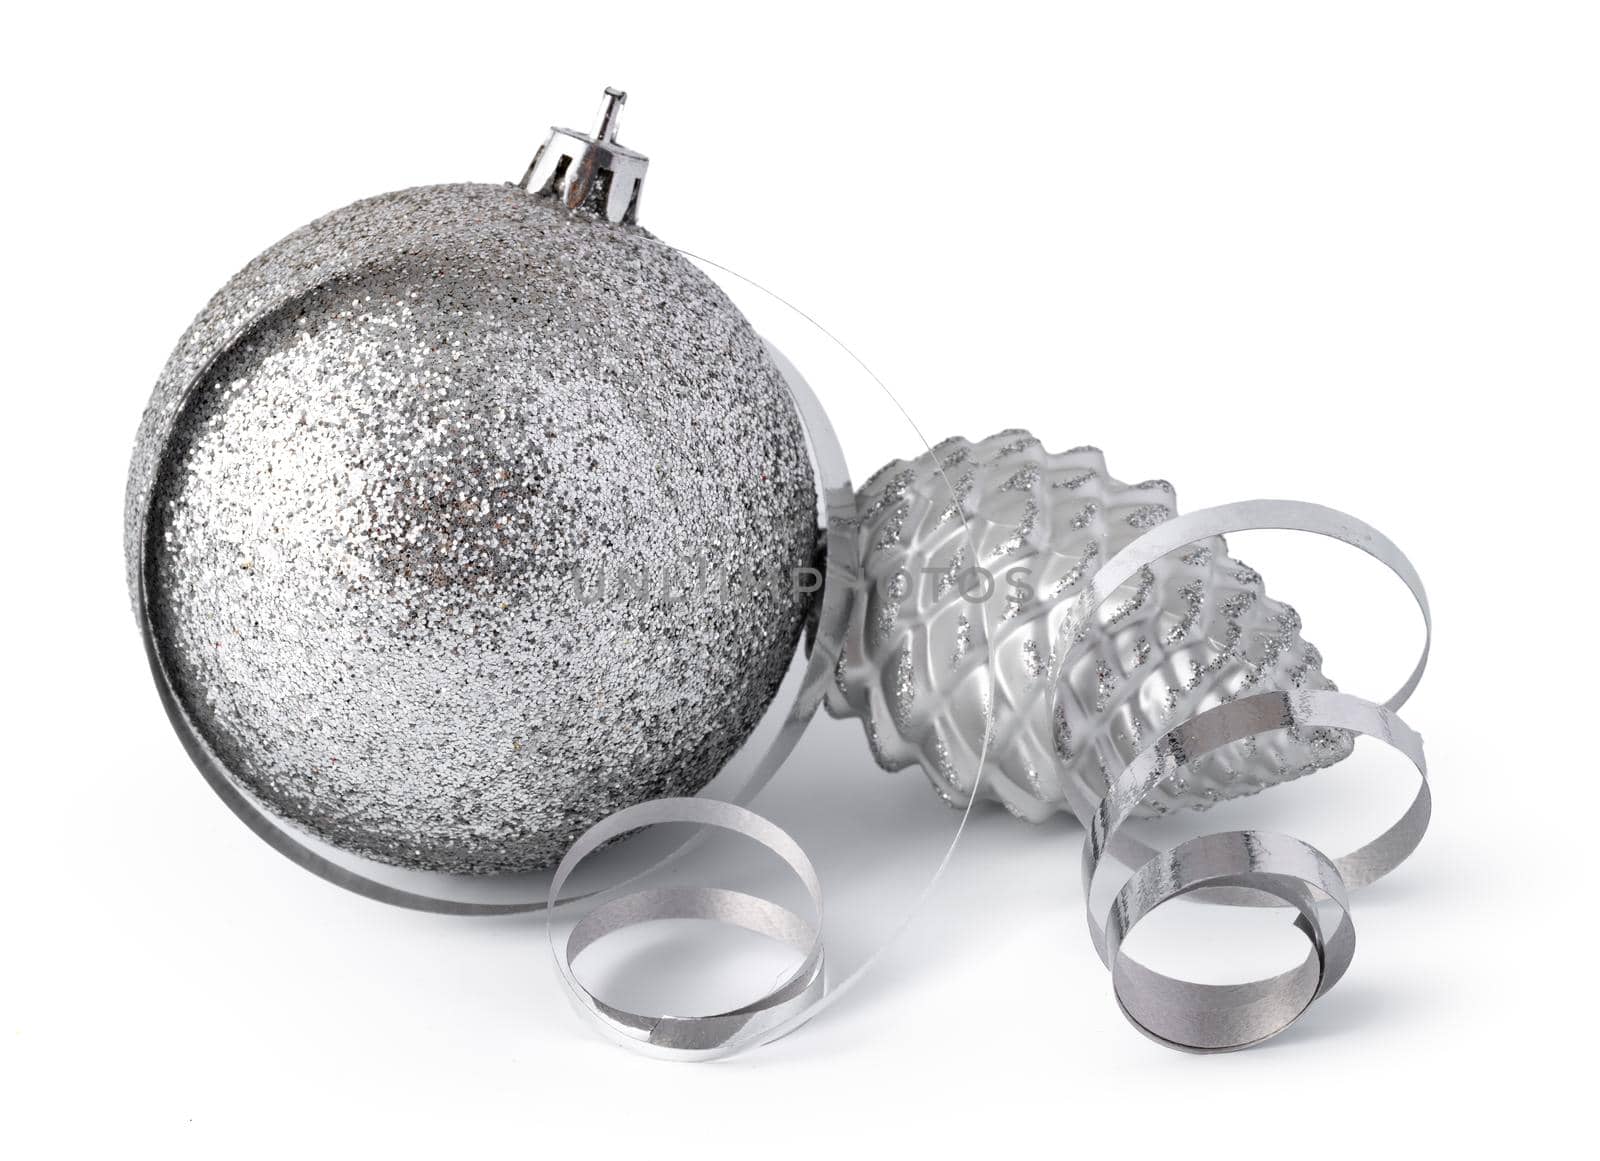 Silver sparkling Christmas baubles isolated on white background, close up